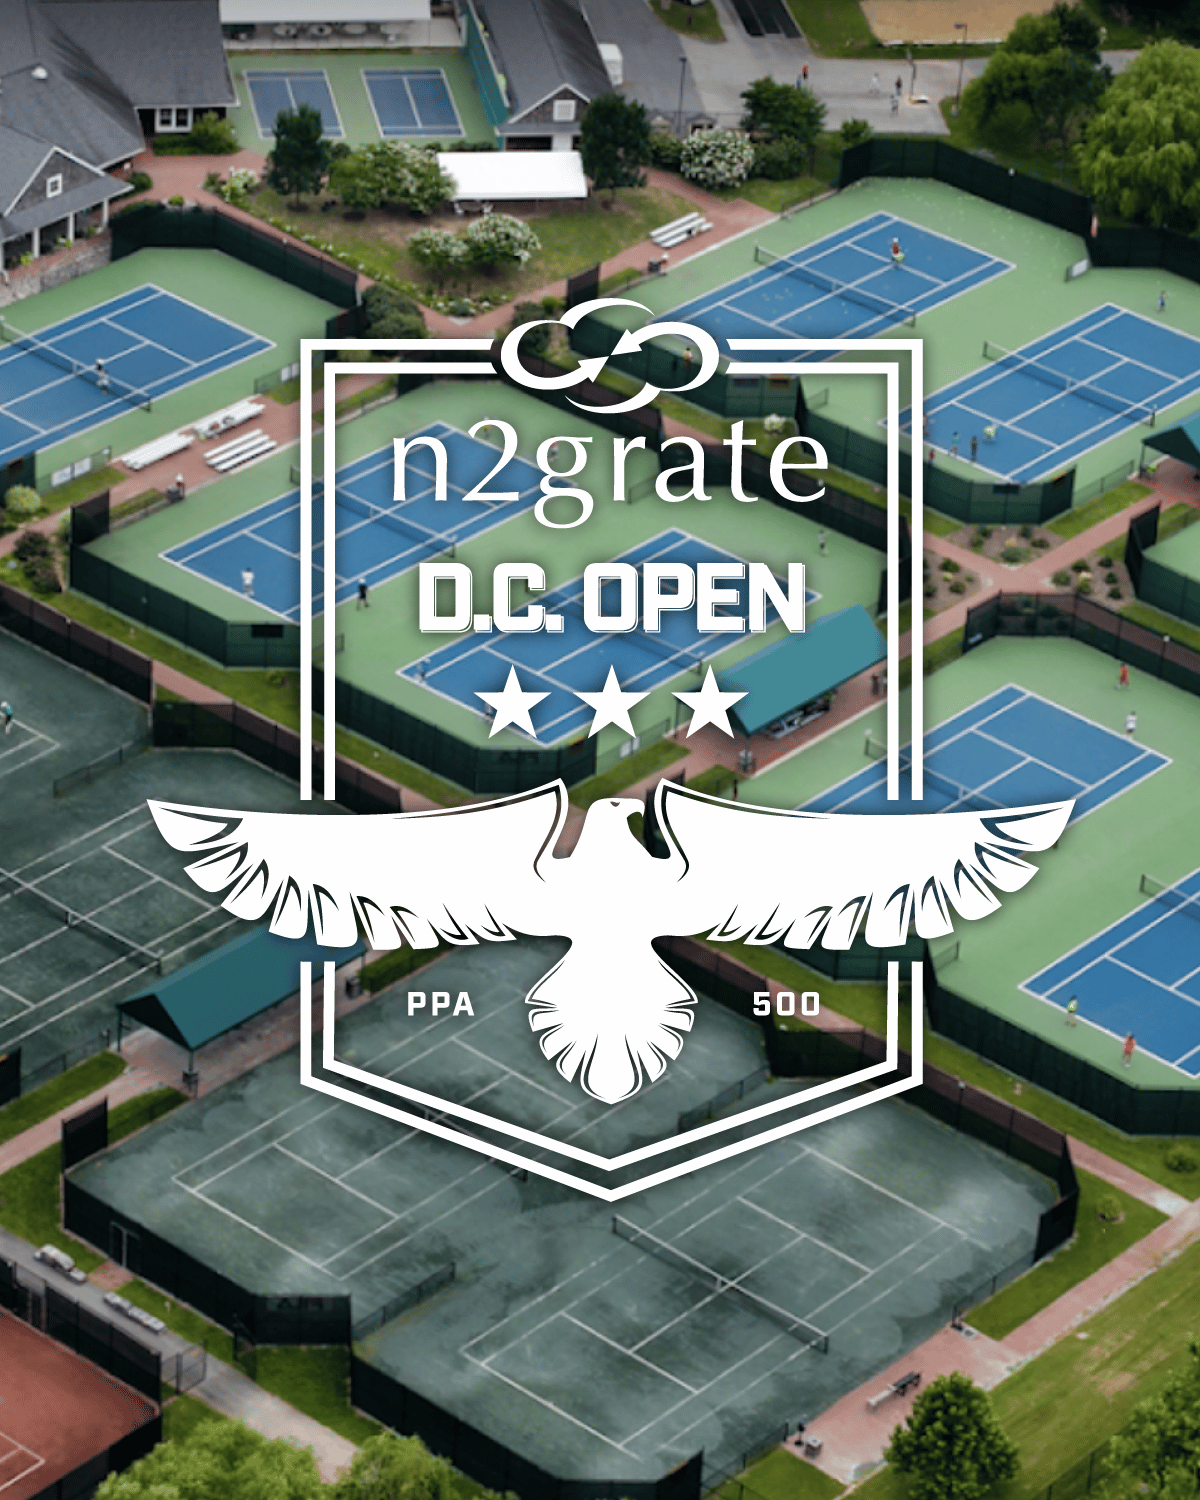 Preview to the n2grate D C Open Professional Pickleball Association